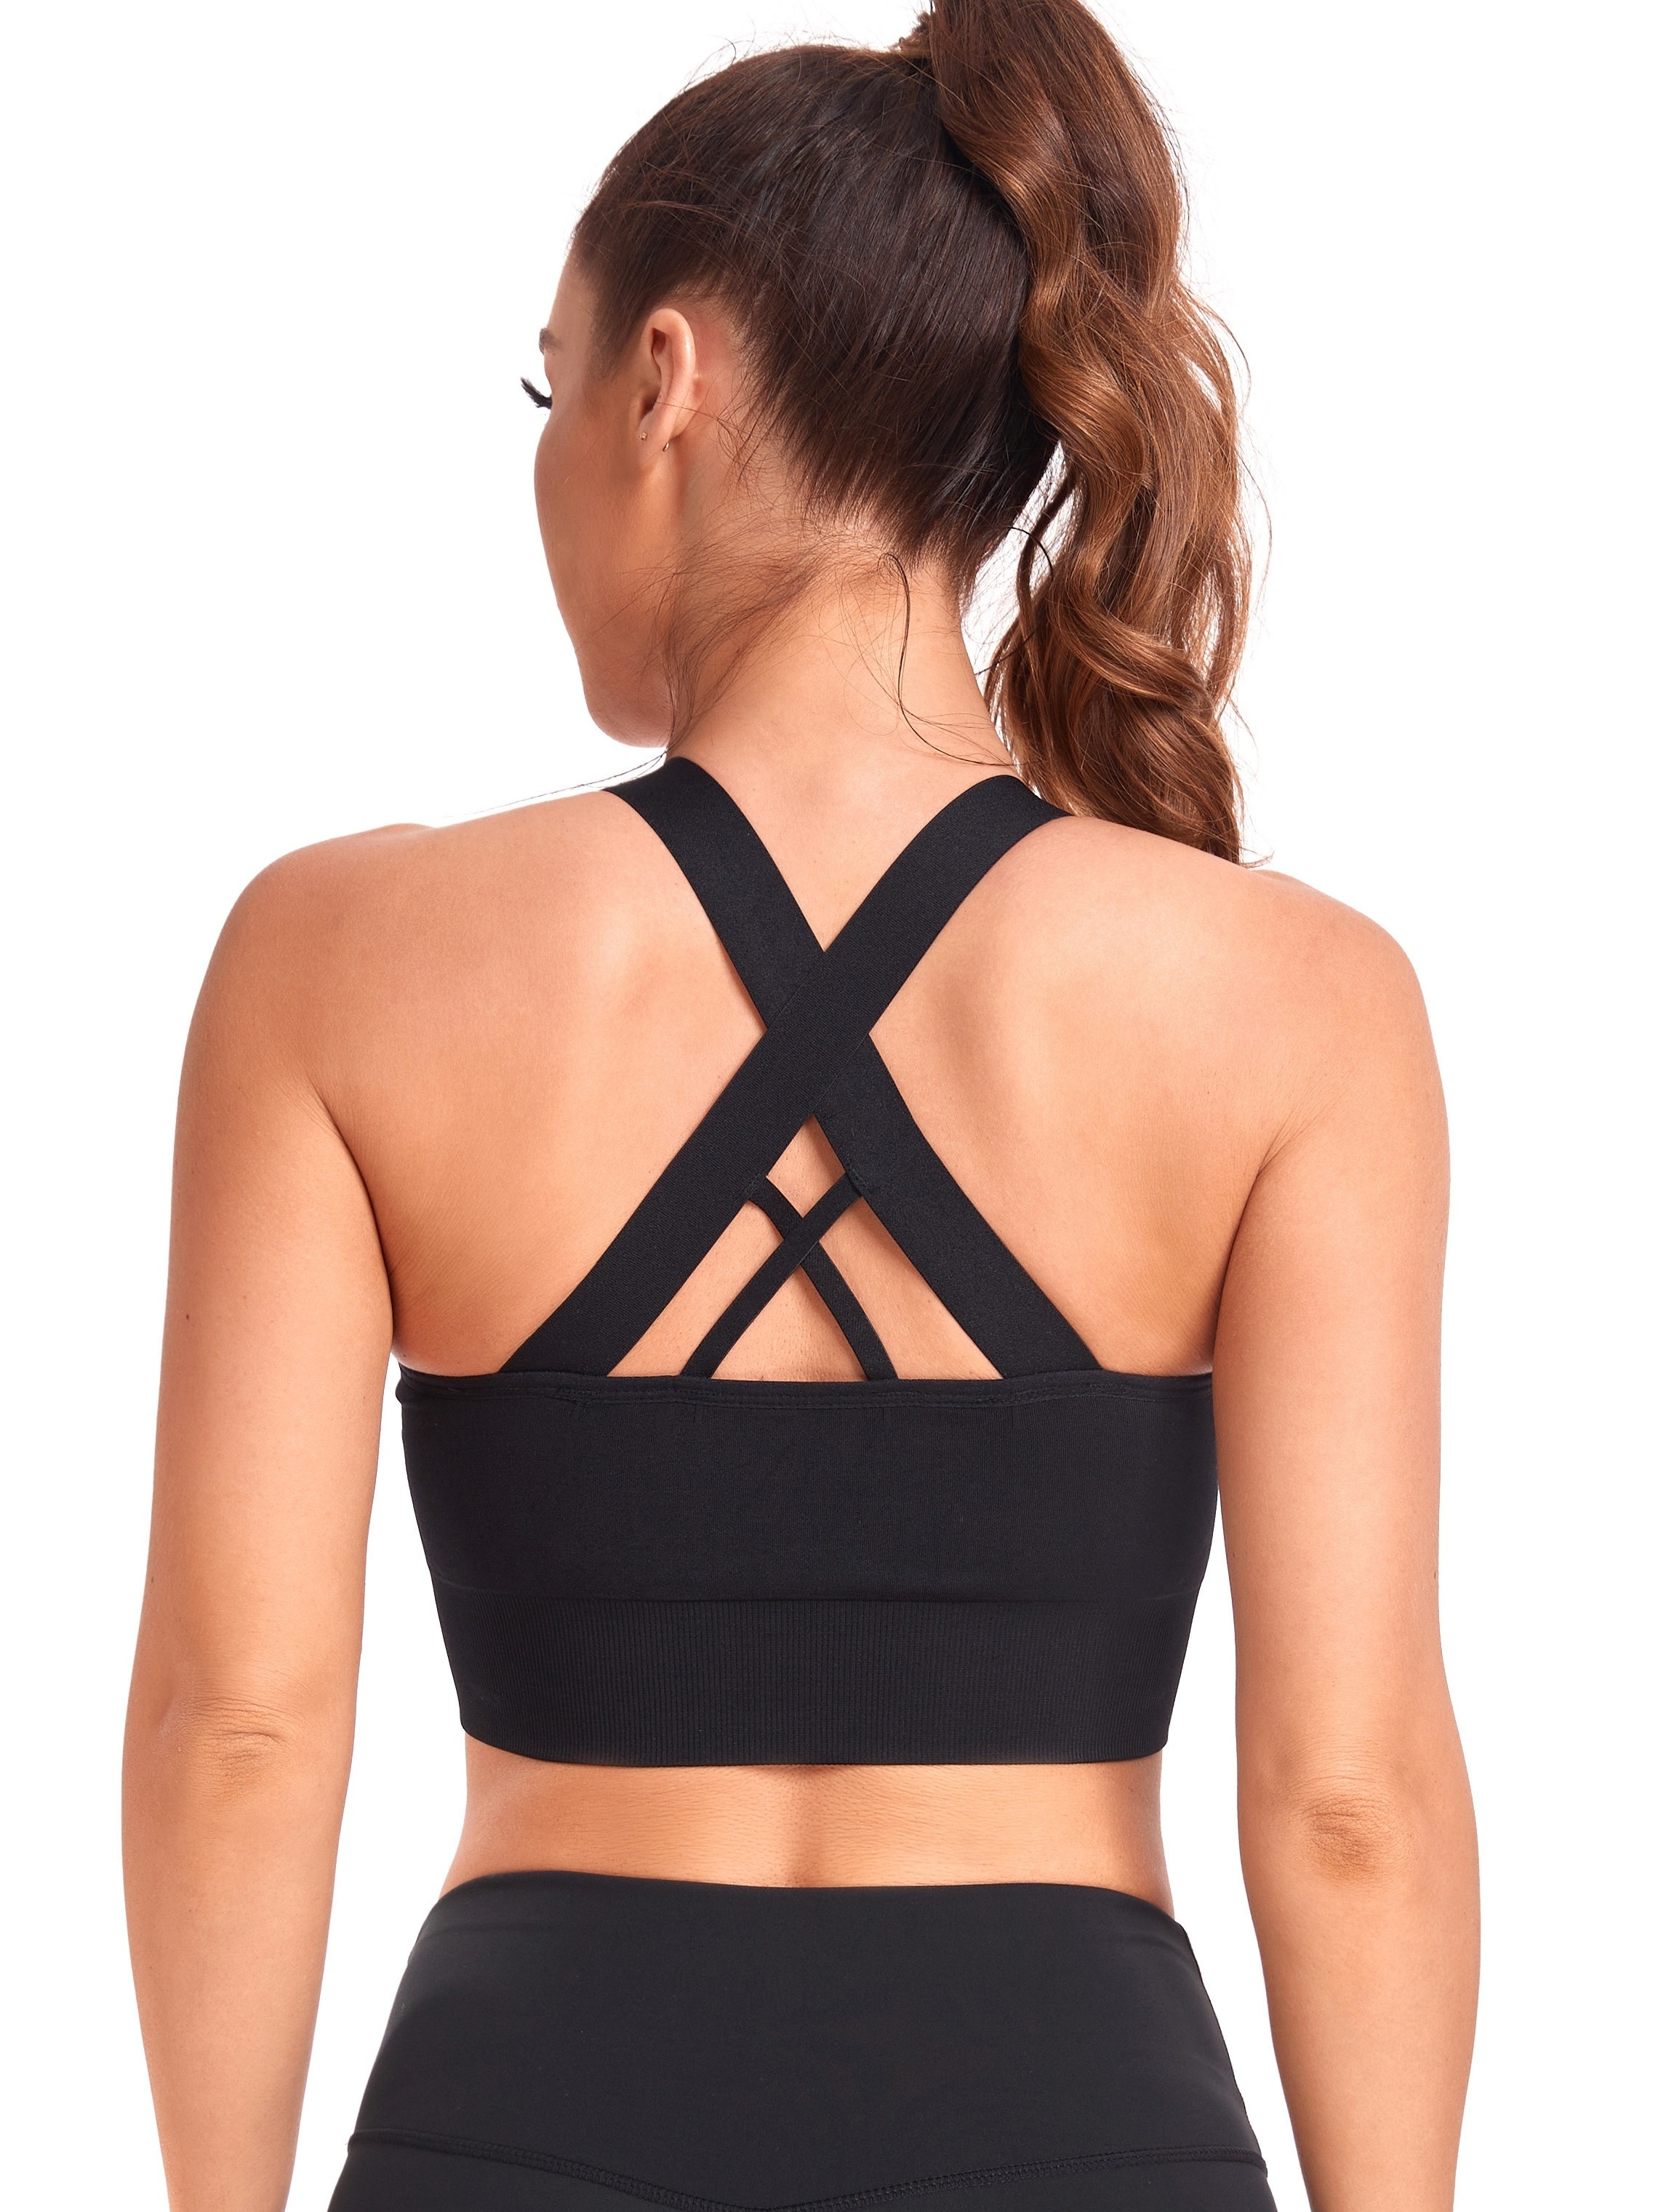  Backless Sports Yoga Bra for Women Padded Workout Crop Tank  Tops Spaghettie Strapy Cross Back Camisole Fitness Shirt Black : Clothing,  Shoes & Jewelry